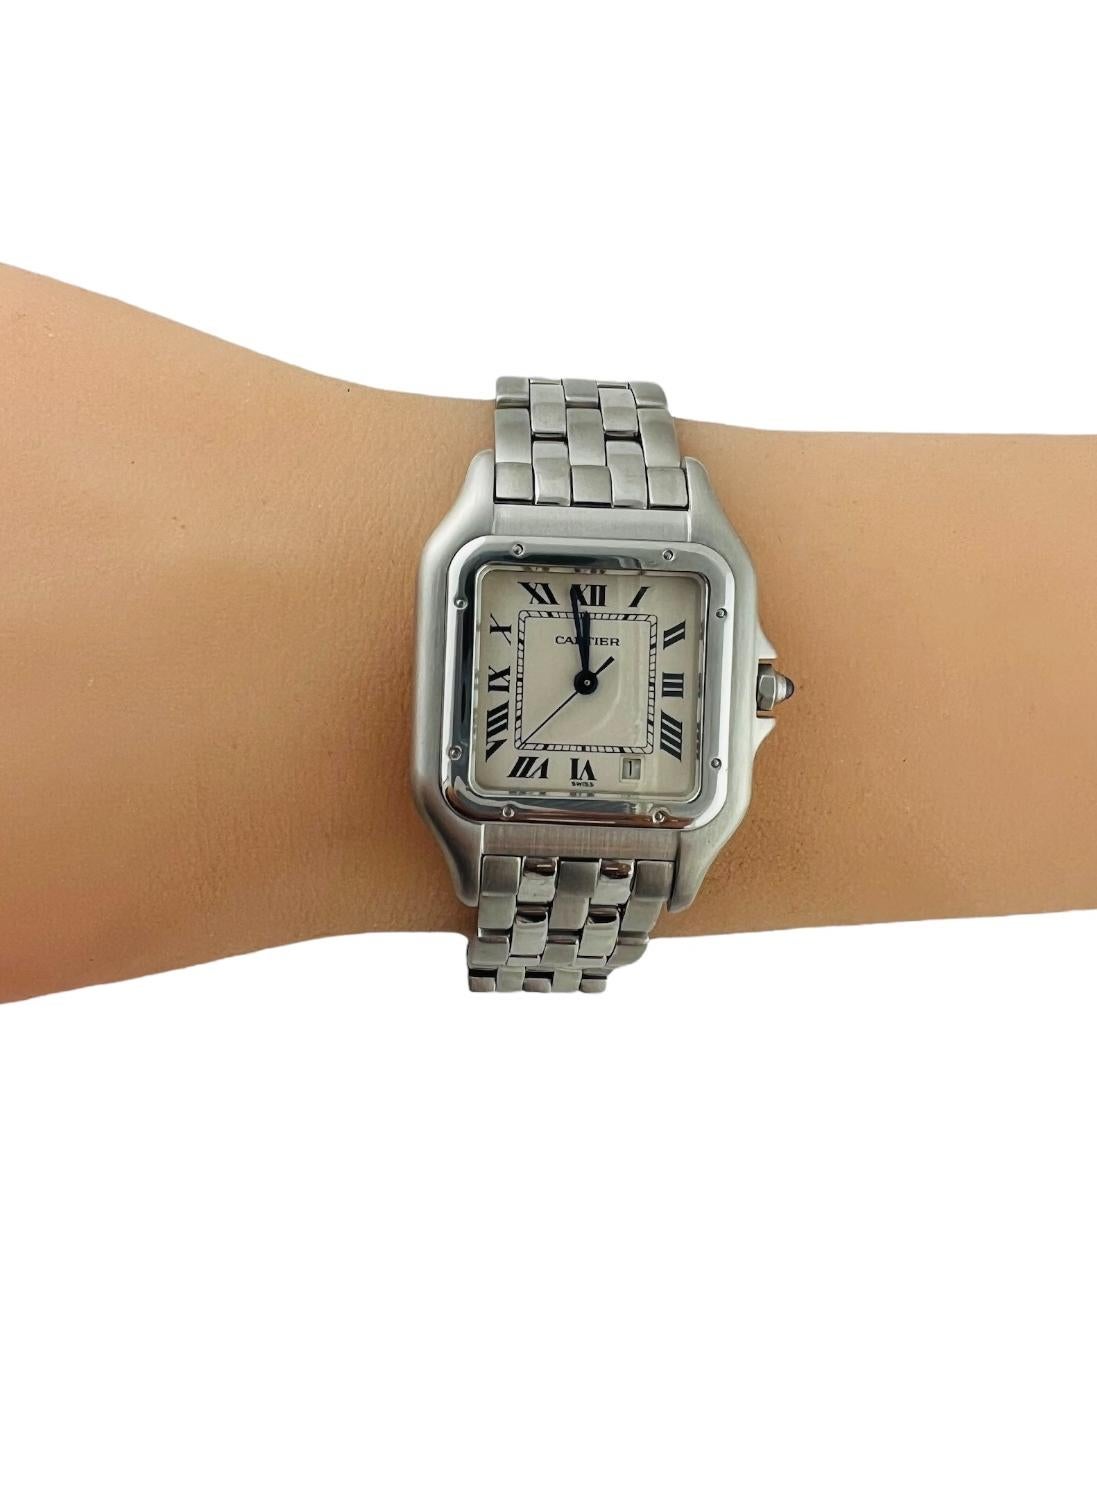 Cartier Panthere Stainless Steel Ladies Midsize Watch White Roman Dial 1310 1